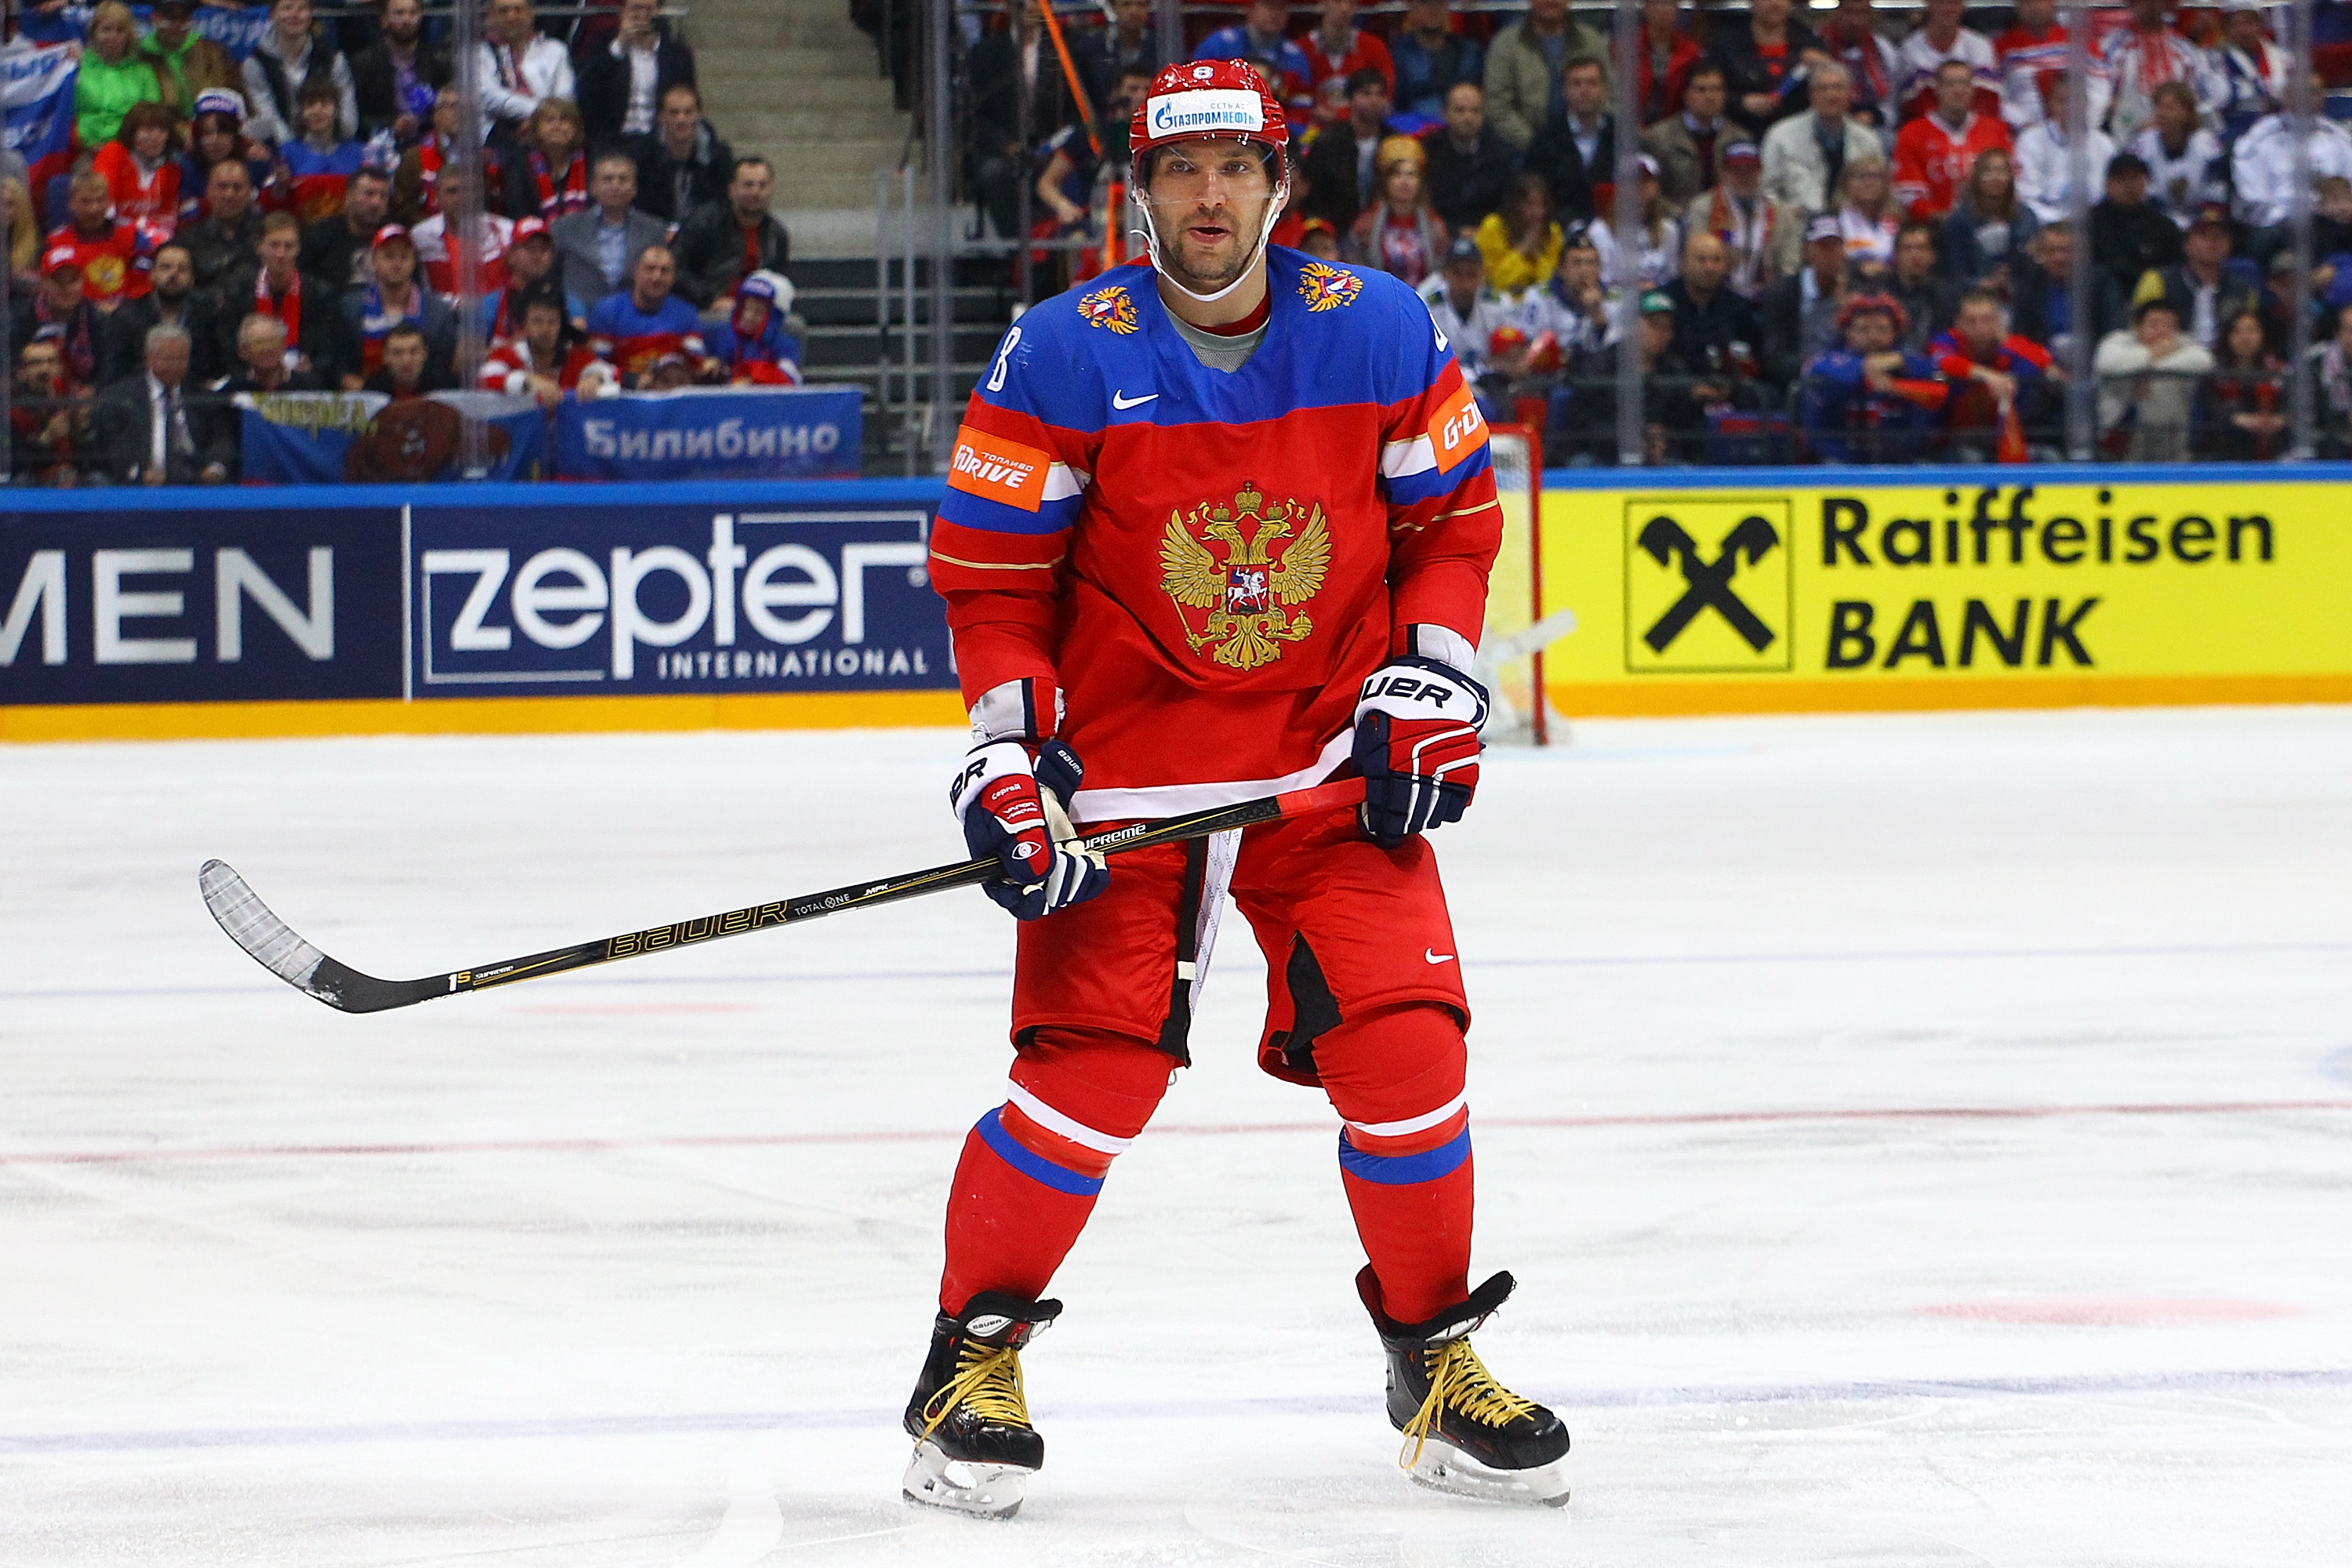 Alex Ovechkin says he will play in 2018 Olympics